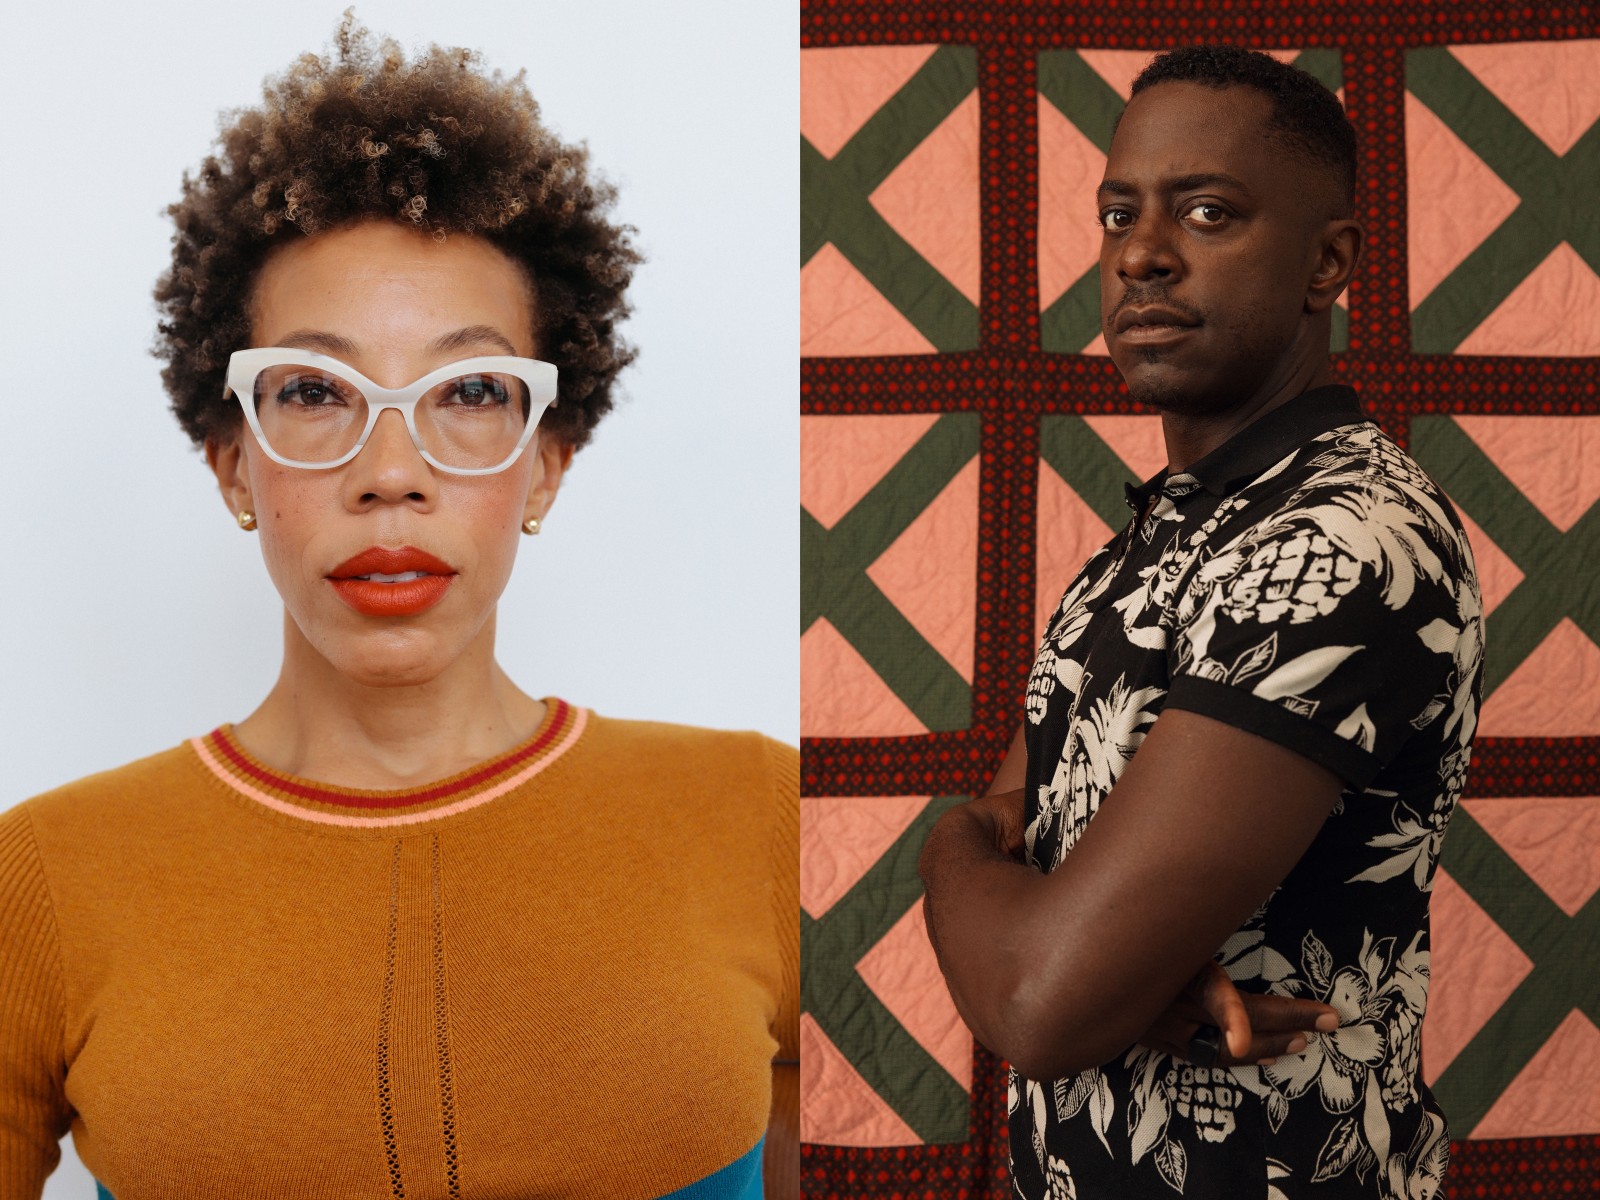 Sanford Biggers and Amy Sherald Join the Board of Directors of Souls Grown Deep Foundation and Community Partnership